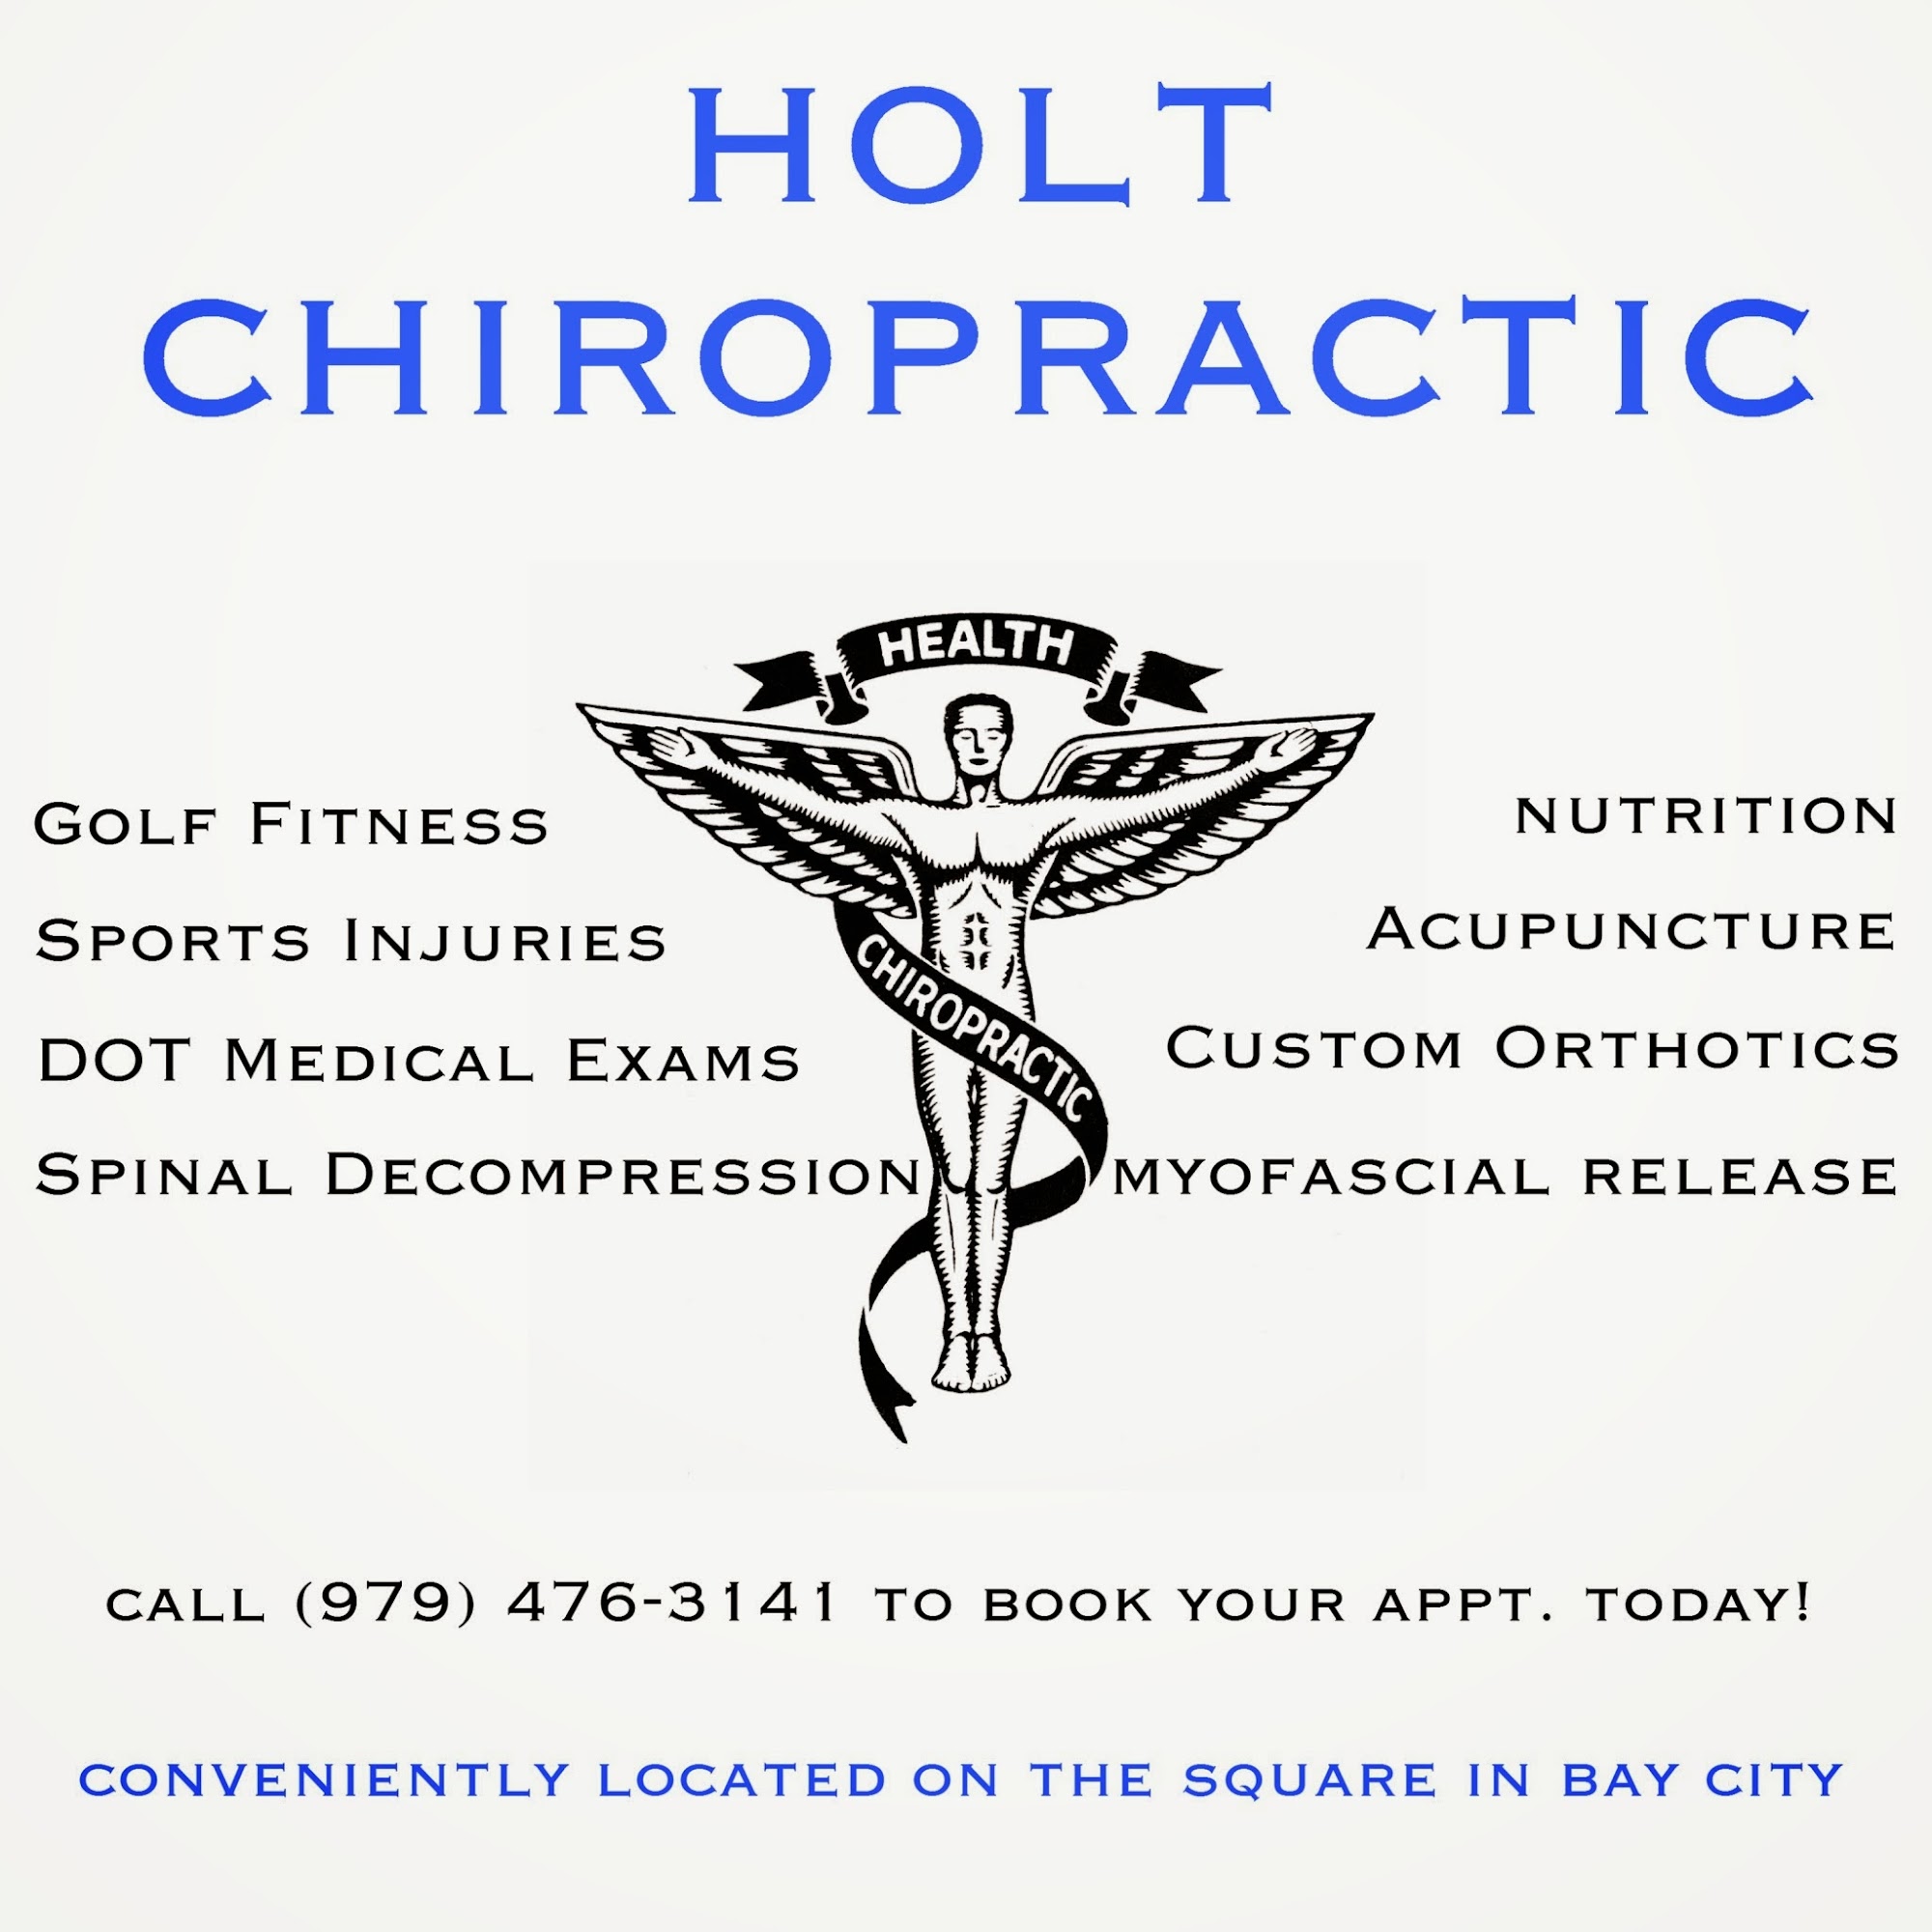 Holt Chiropractic 2212 8th St, Bay City Texas 77414